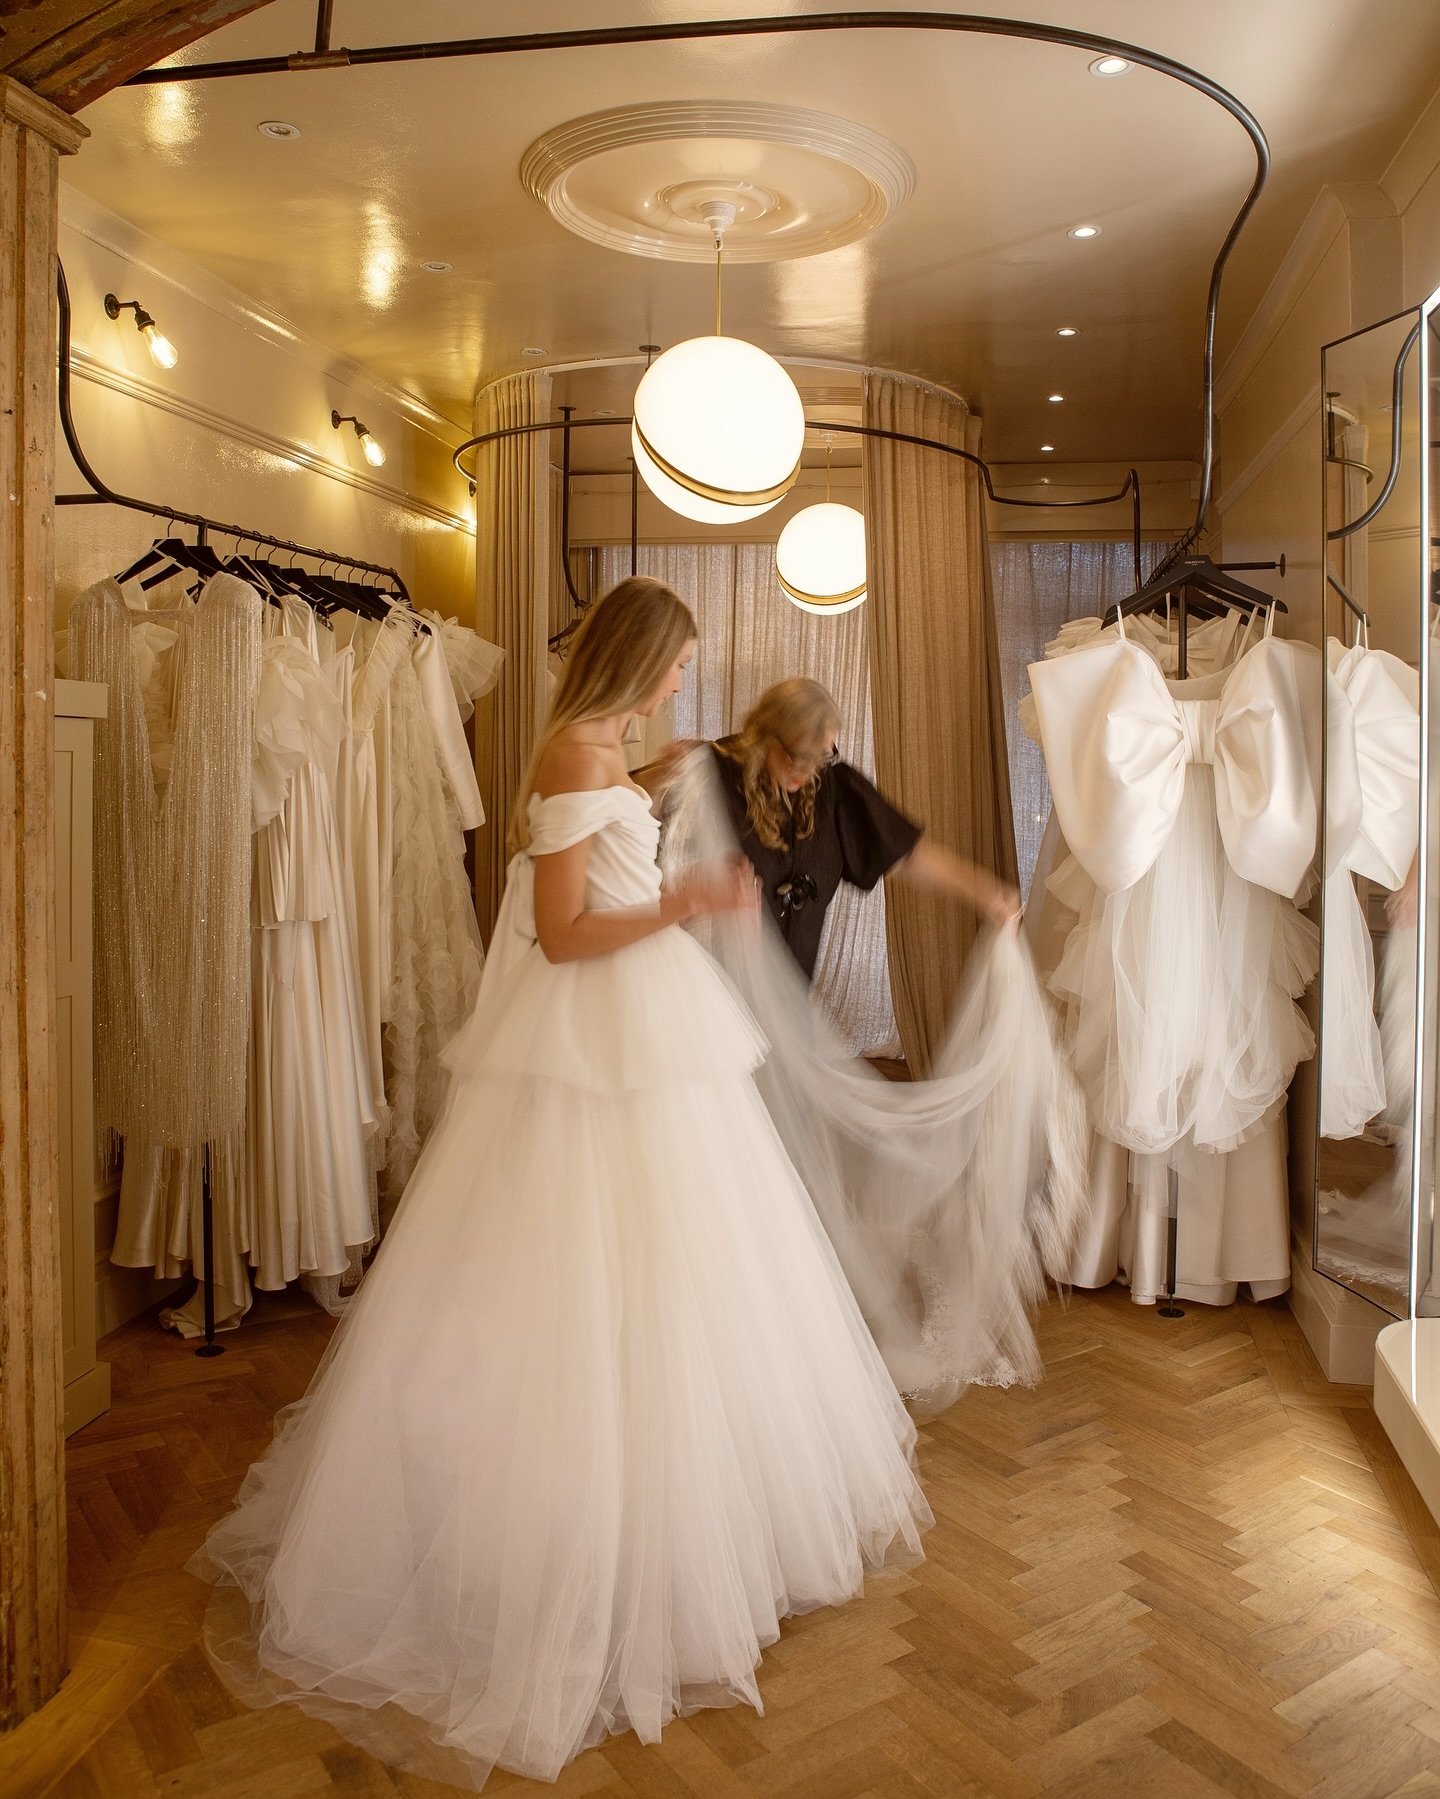 Tucked away on a beautiful Georgian street, moments away from Kings cross and Euston, our boutique is a haven for brides-to-be. 

Make an appointment to find your perfect wedding dress. Booking link in our bio.

Images by @catvinton 

#HalfpennyLondo